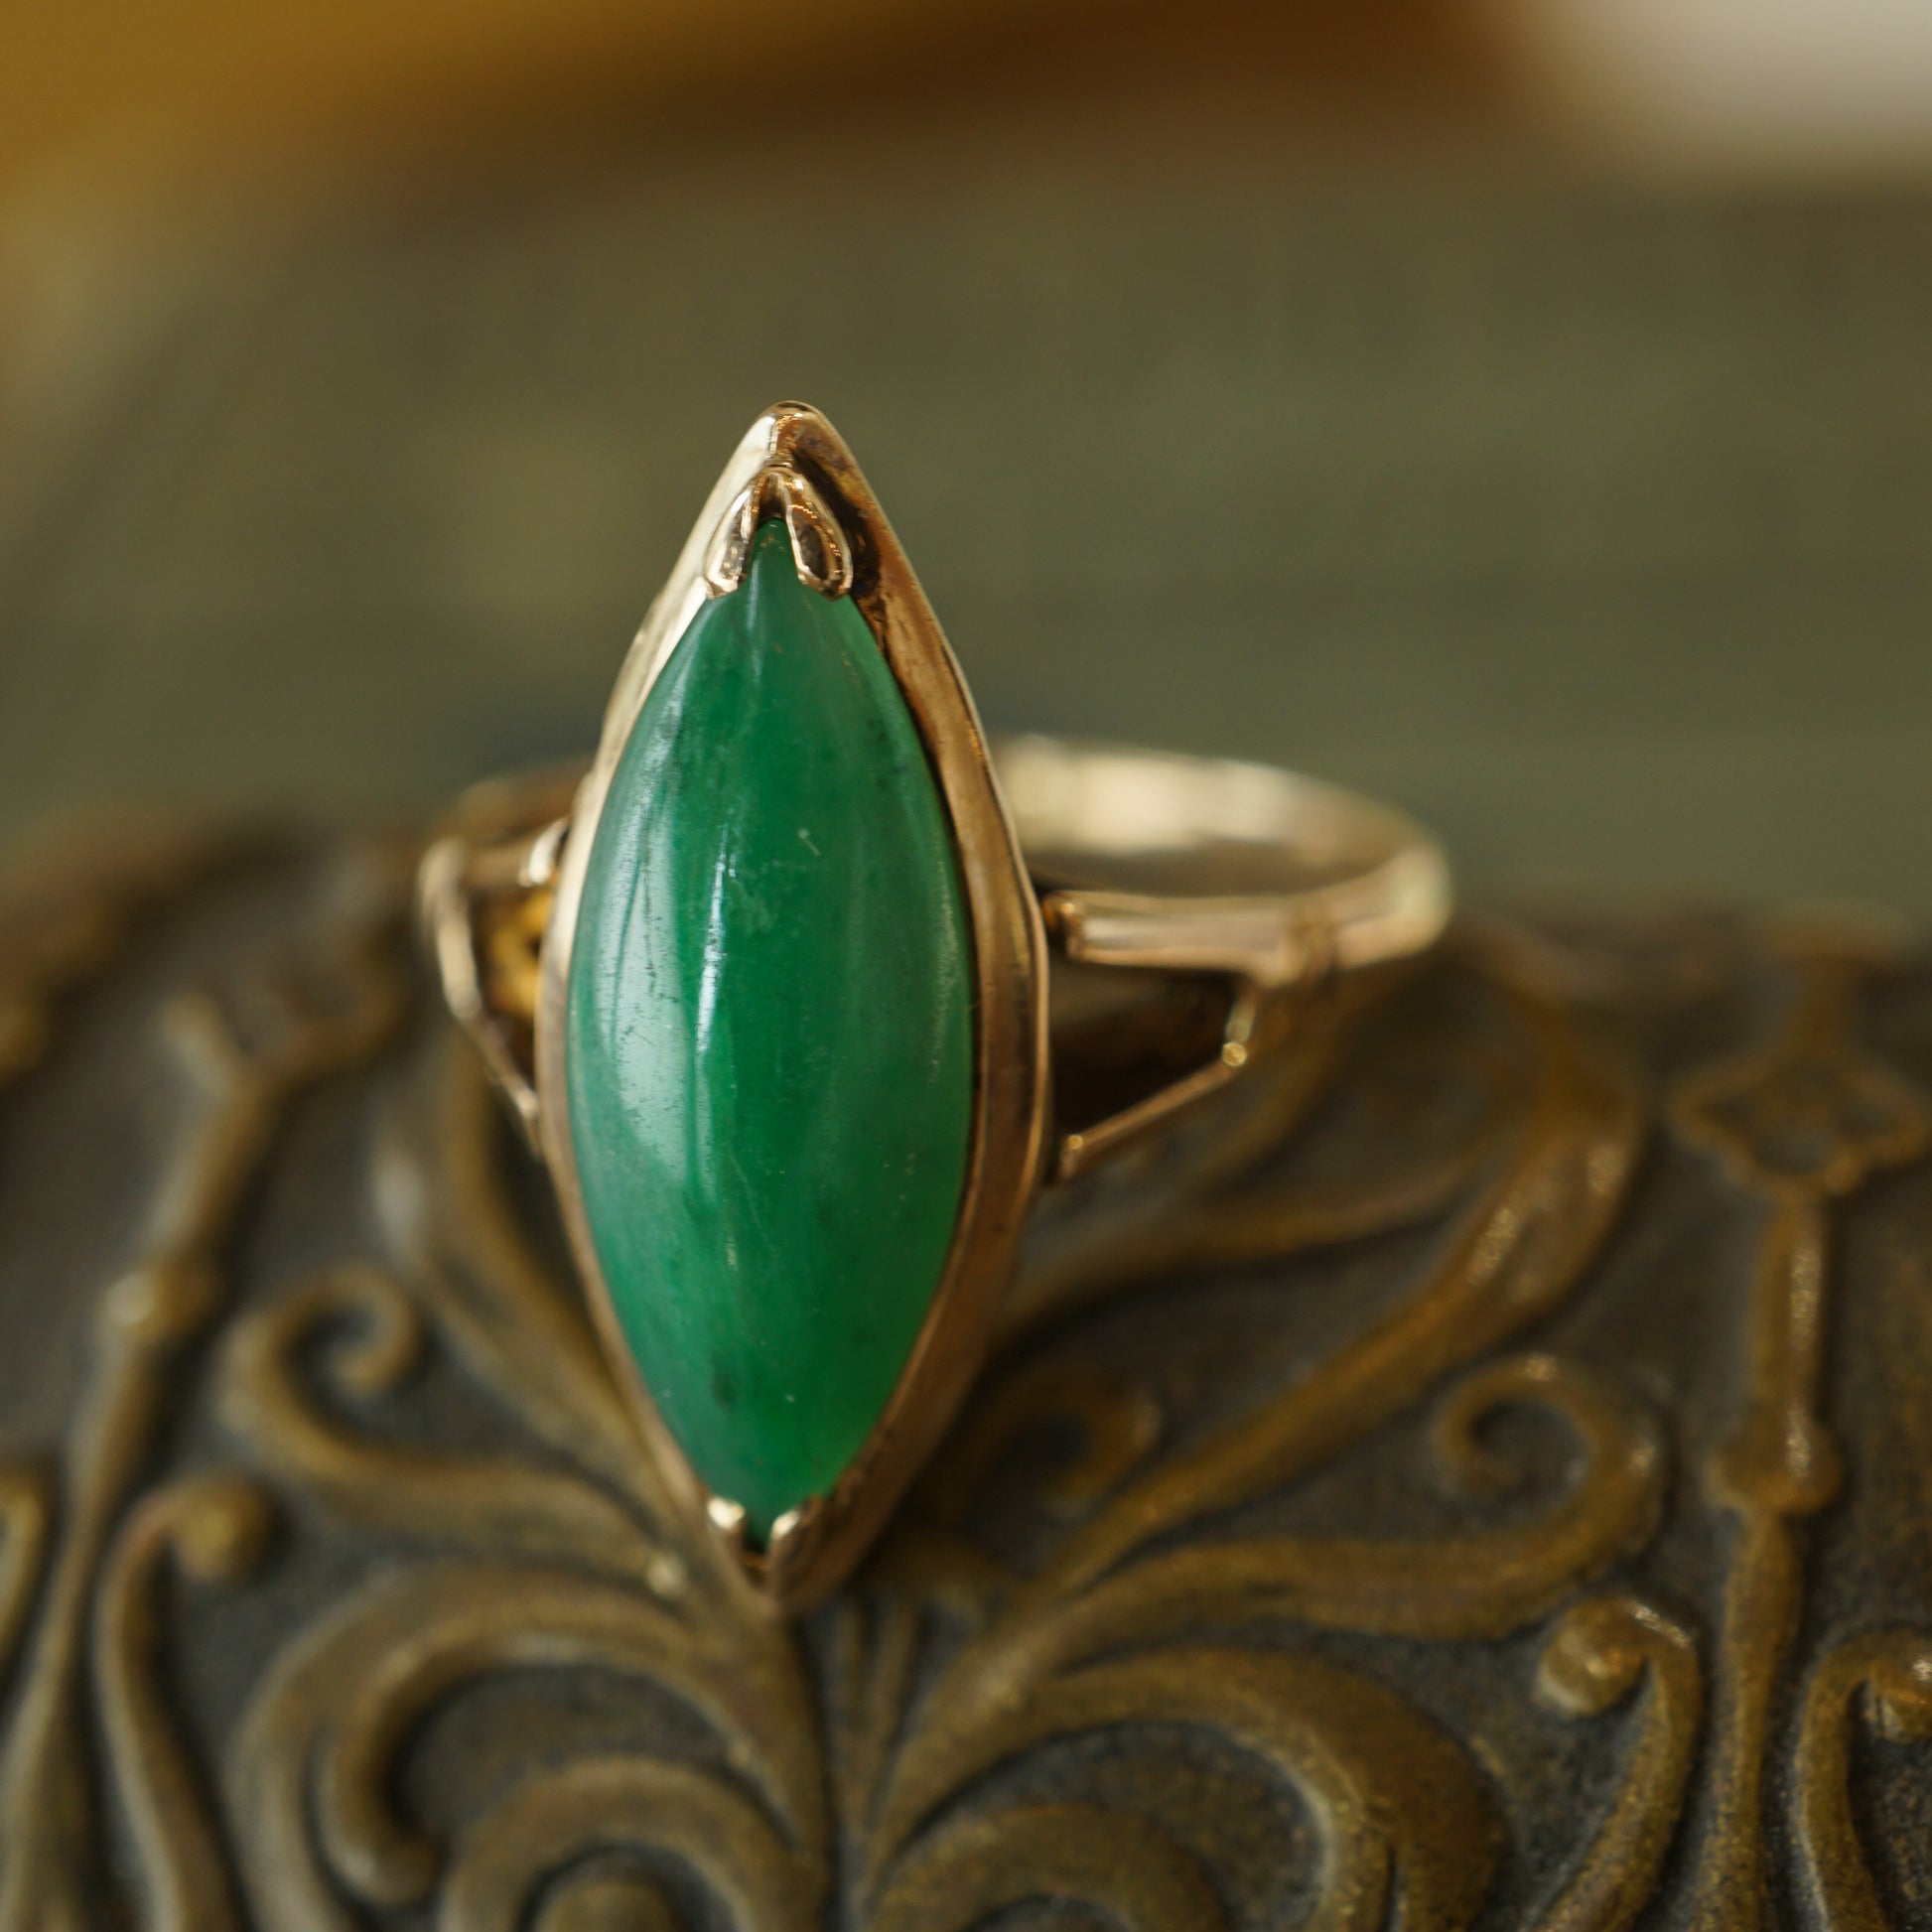 Mid-Century Marquise Shaped Jade Ring in 14k Yellow GoldComposition: 14 Karat Yellow Gold Ring Size: 7 Total Gram Weight: 3.3 g Inscription: 14k
      